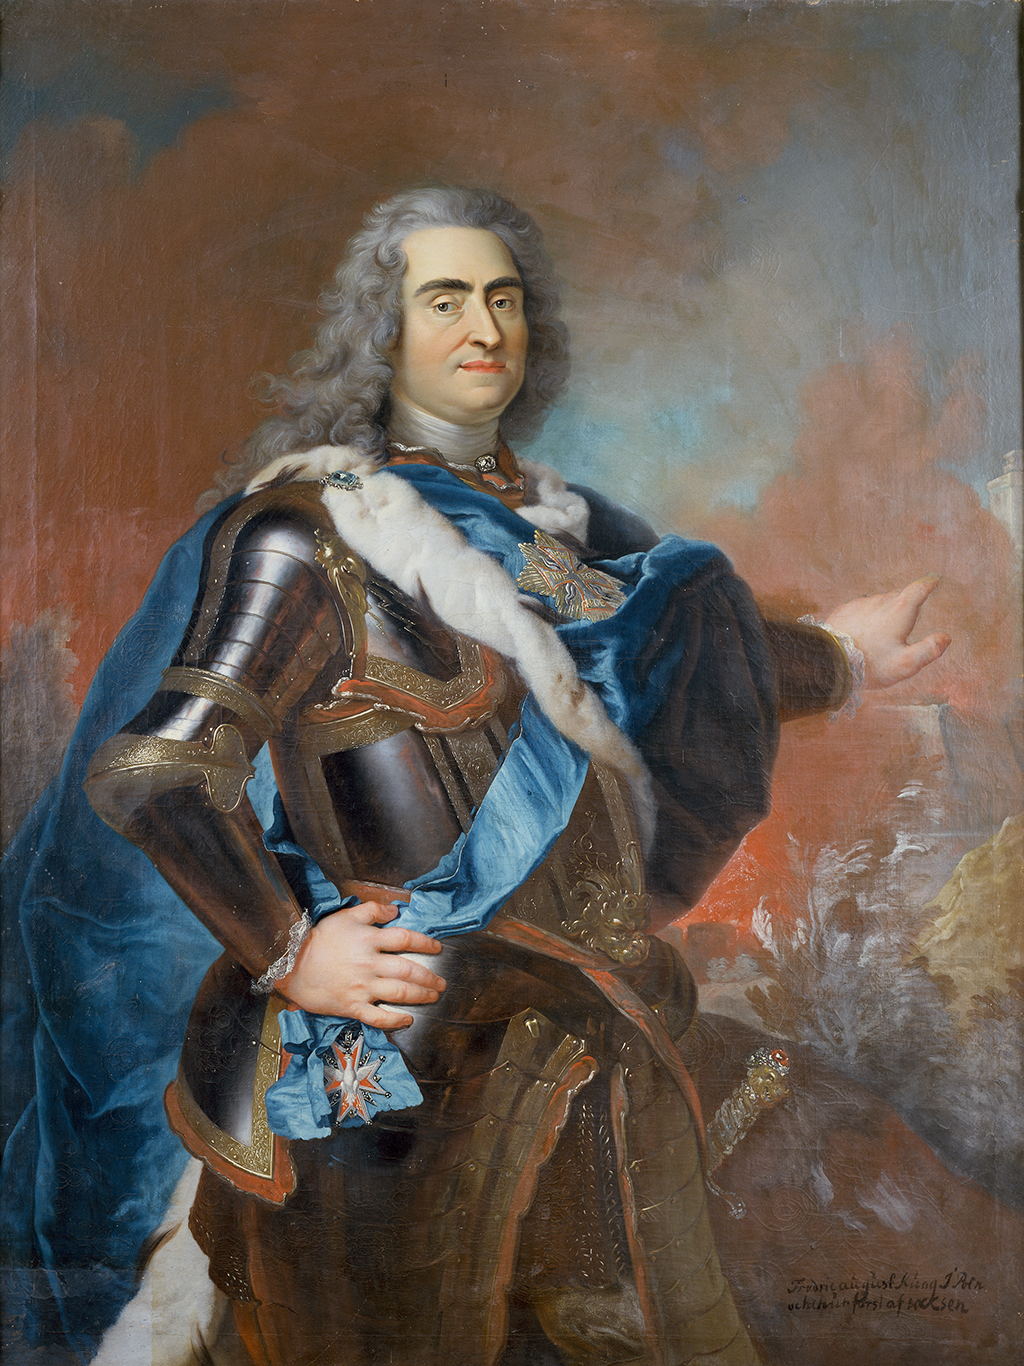 A painting of a man with long curly gray hair. He dons a reflective black armor with gold/bronze and orange accents along the edges of the metal plates. He wears a long blue cape that wraps around his neck and shoulder. The background consists orange and grey smoke or fog covering a blue background.